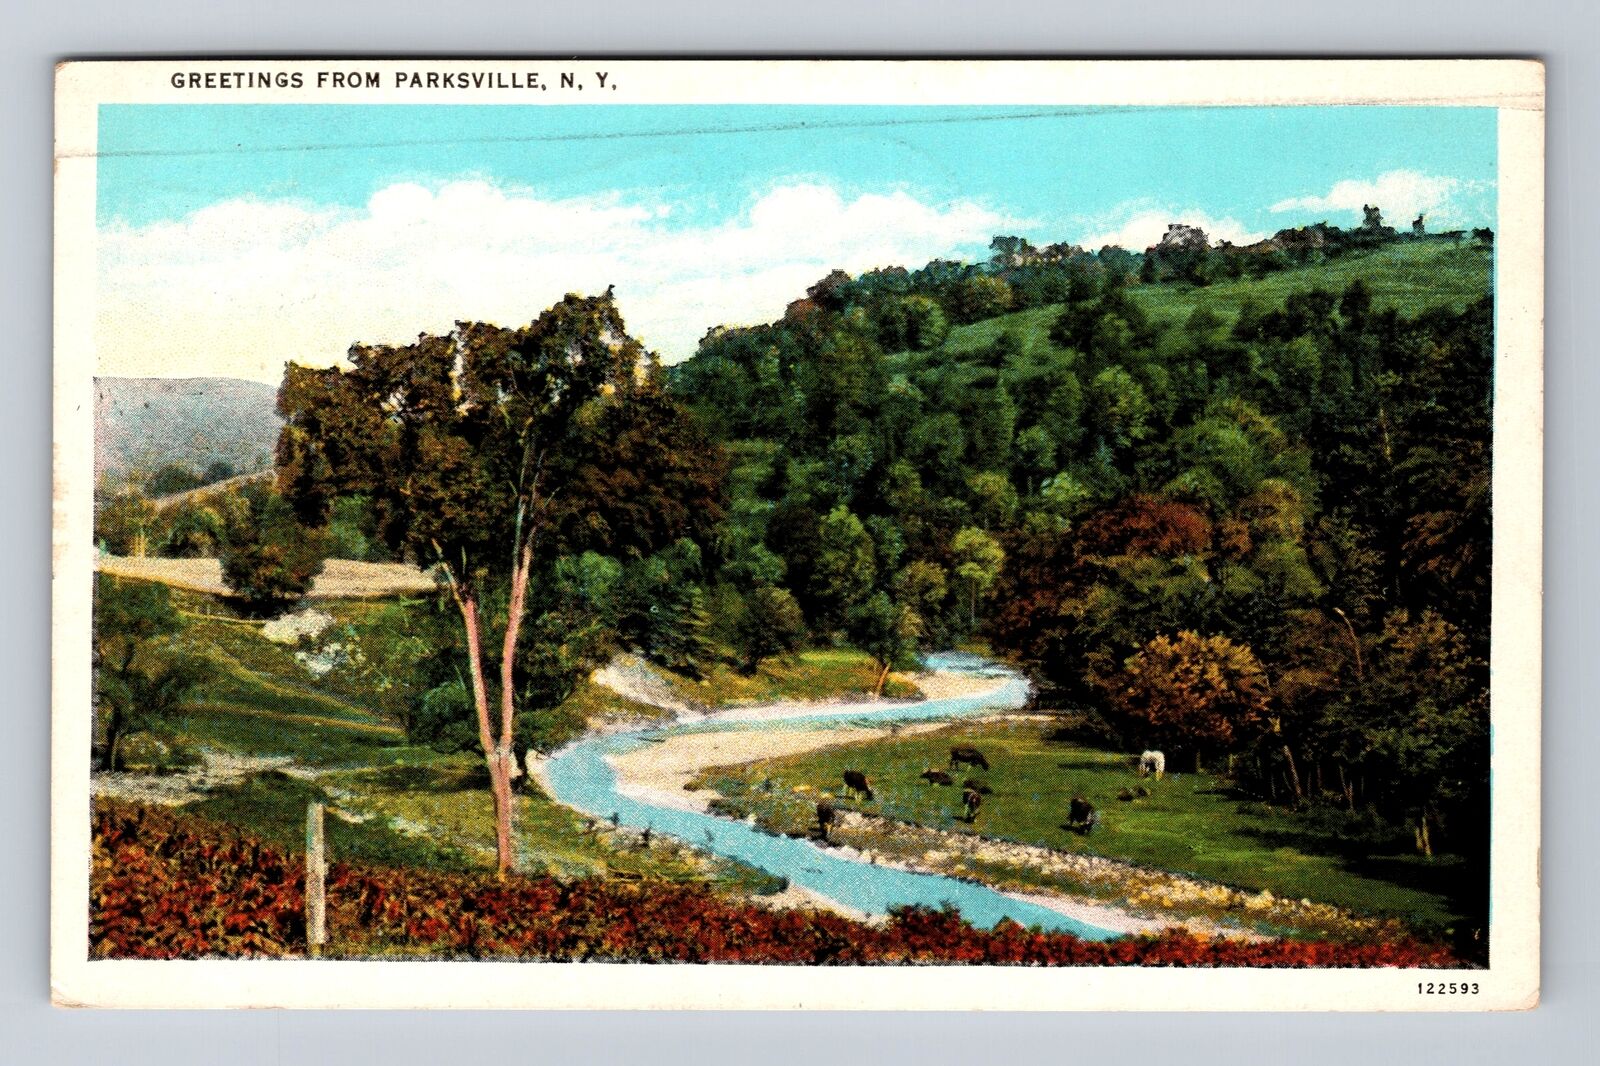 Parksville NY-New York, Scenic Countryside Greetings, Antique Vintage Postcard